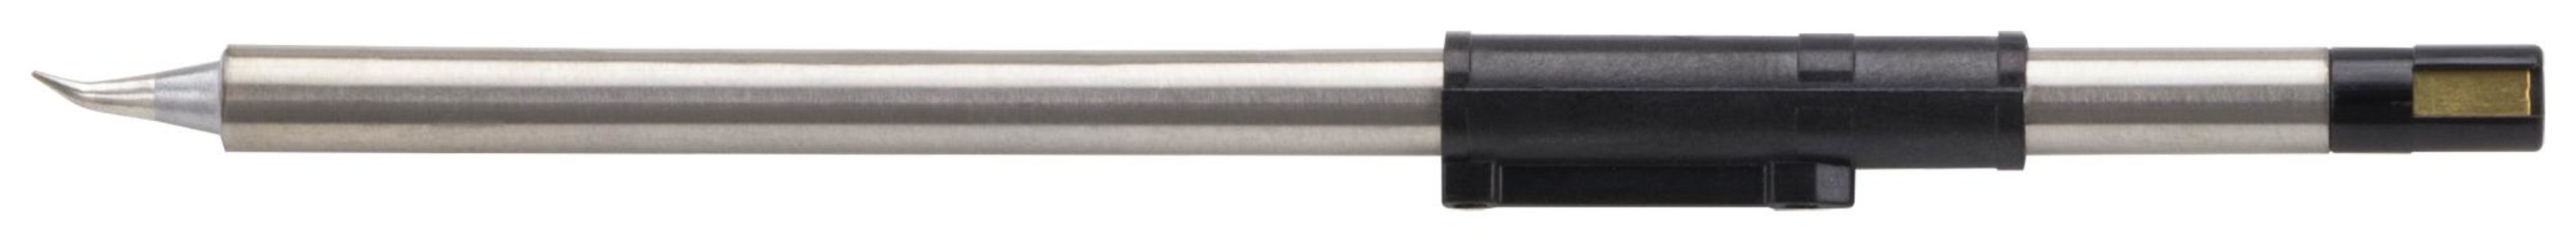 Pace 1124-0003 Tip Cartridge, Bent Conical, 0.4mm